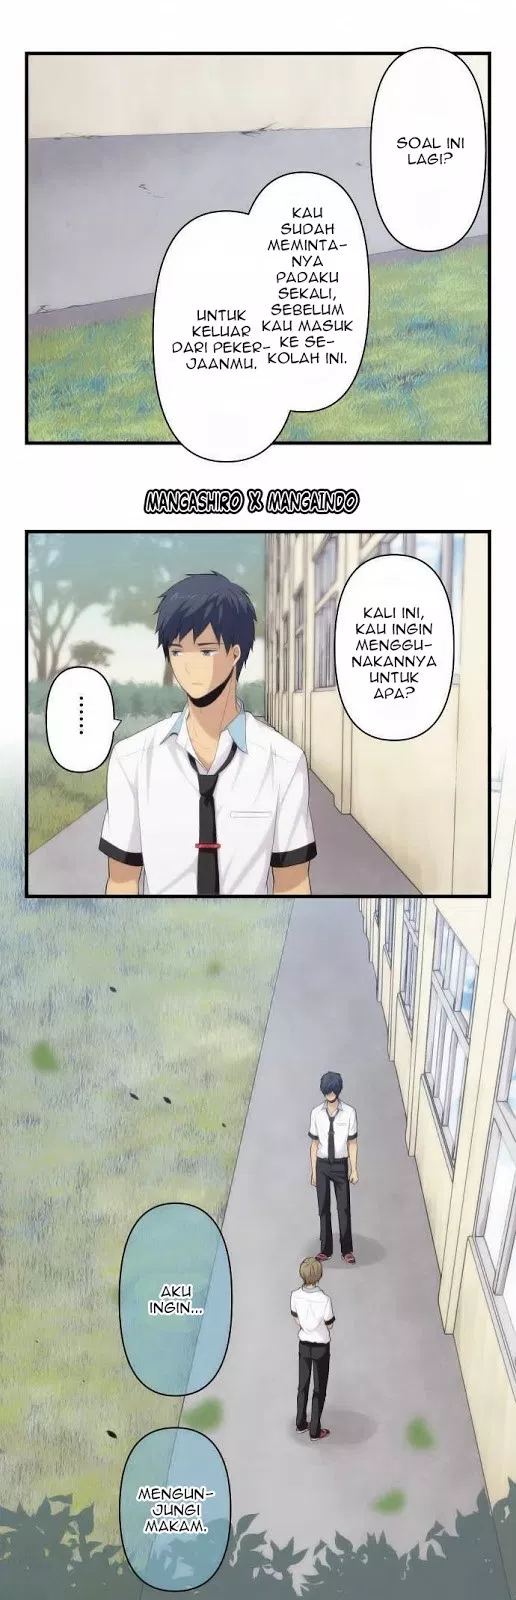 ReLIFE Chapter 86